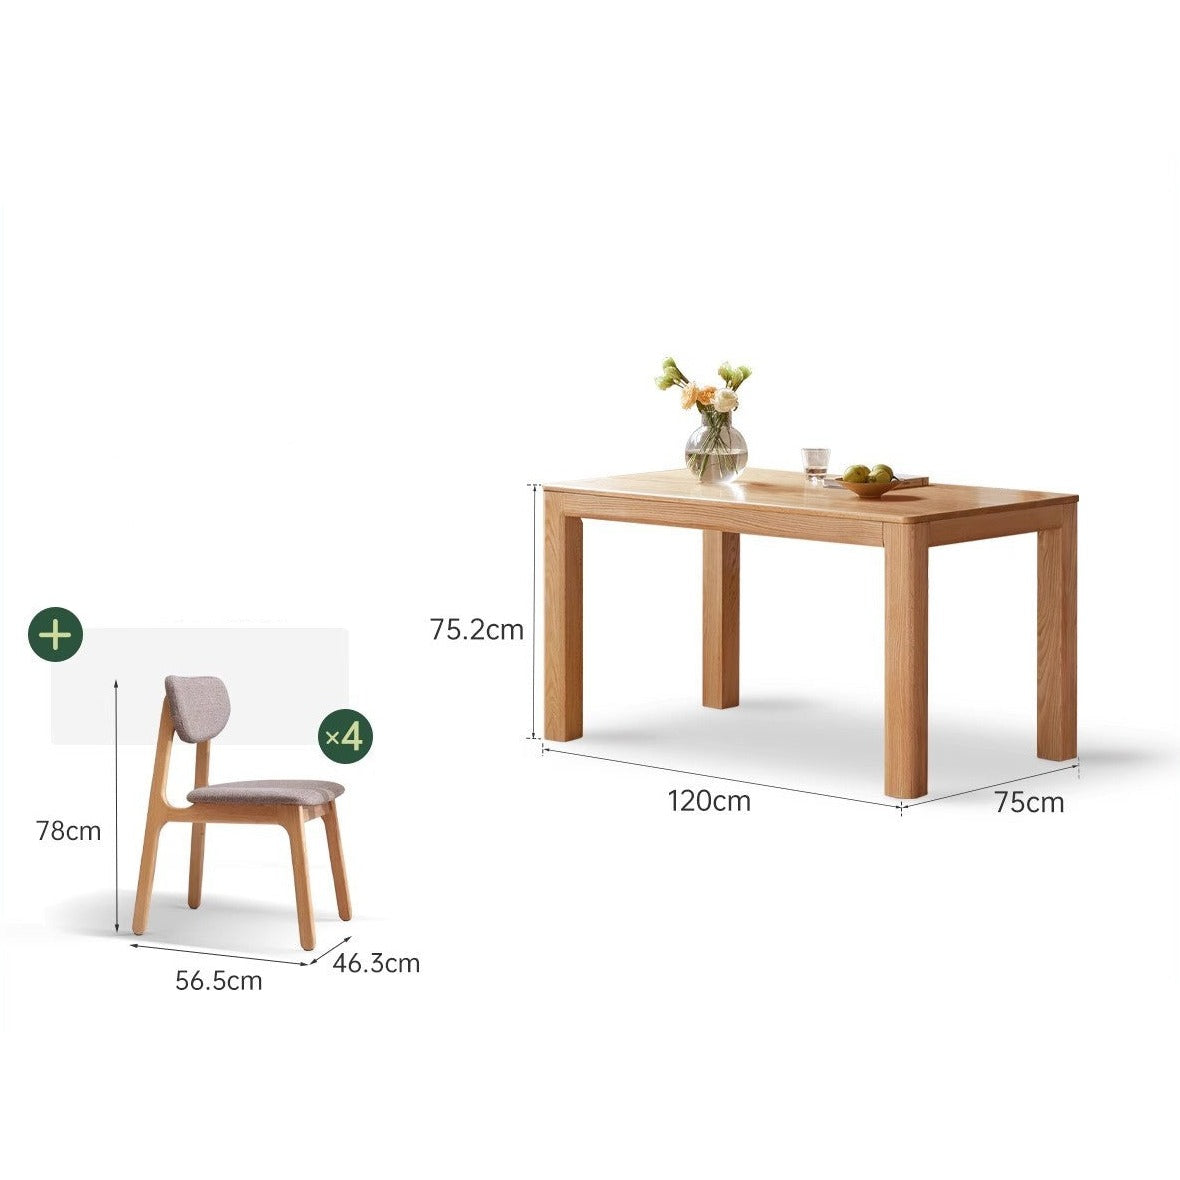 Oak Solid Wood Rectangular Dining Table, One Table and Four Chairs